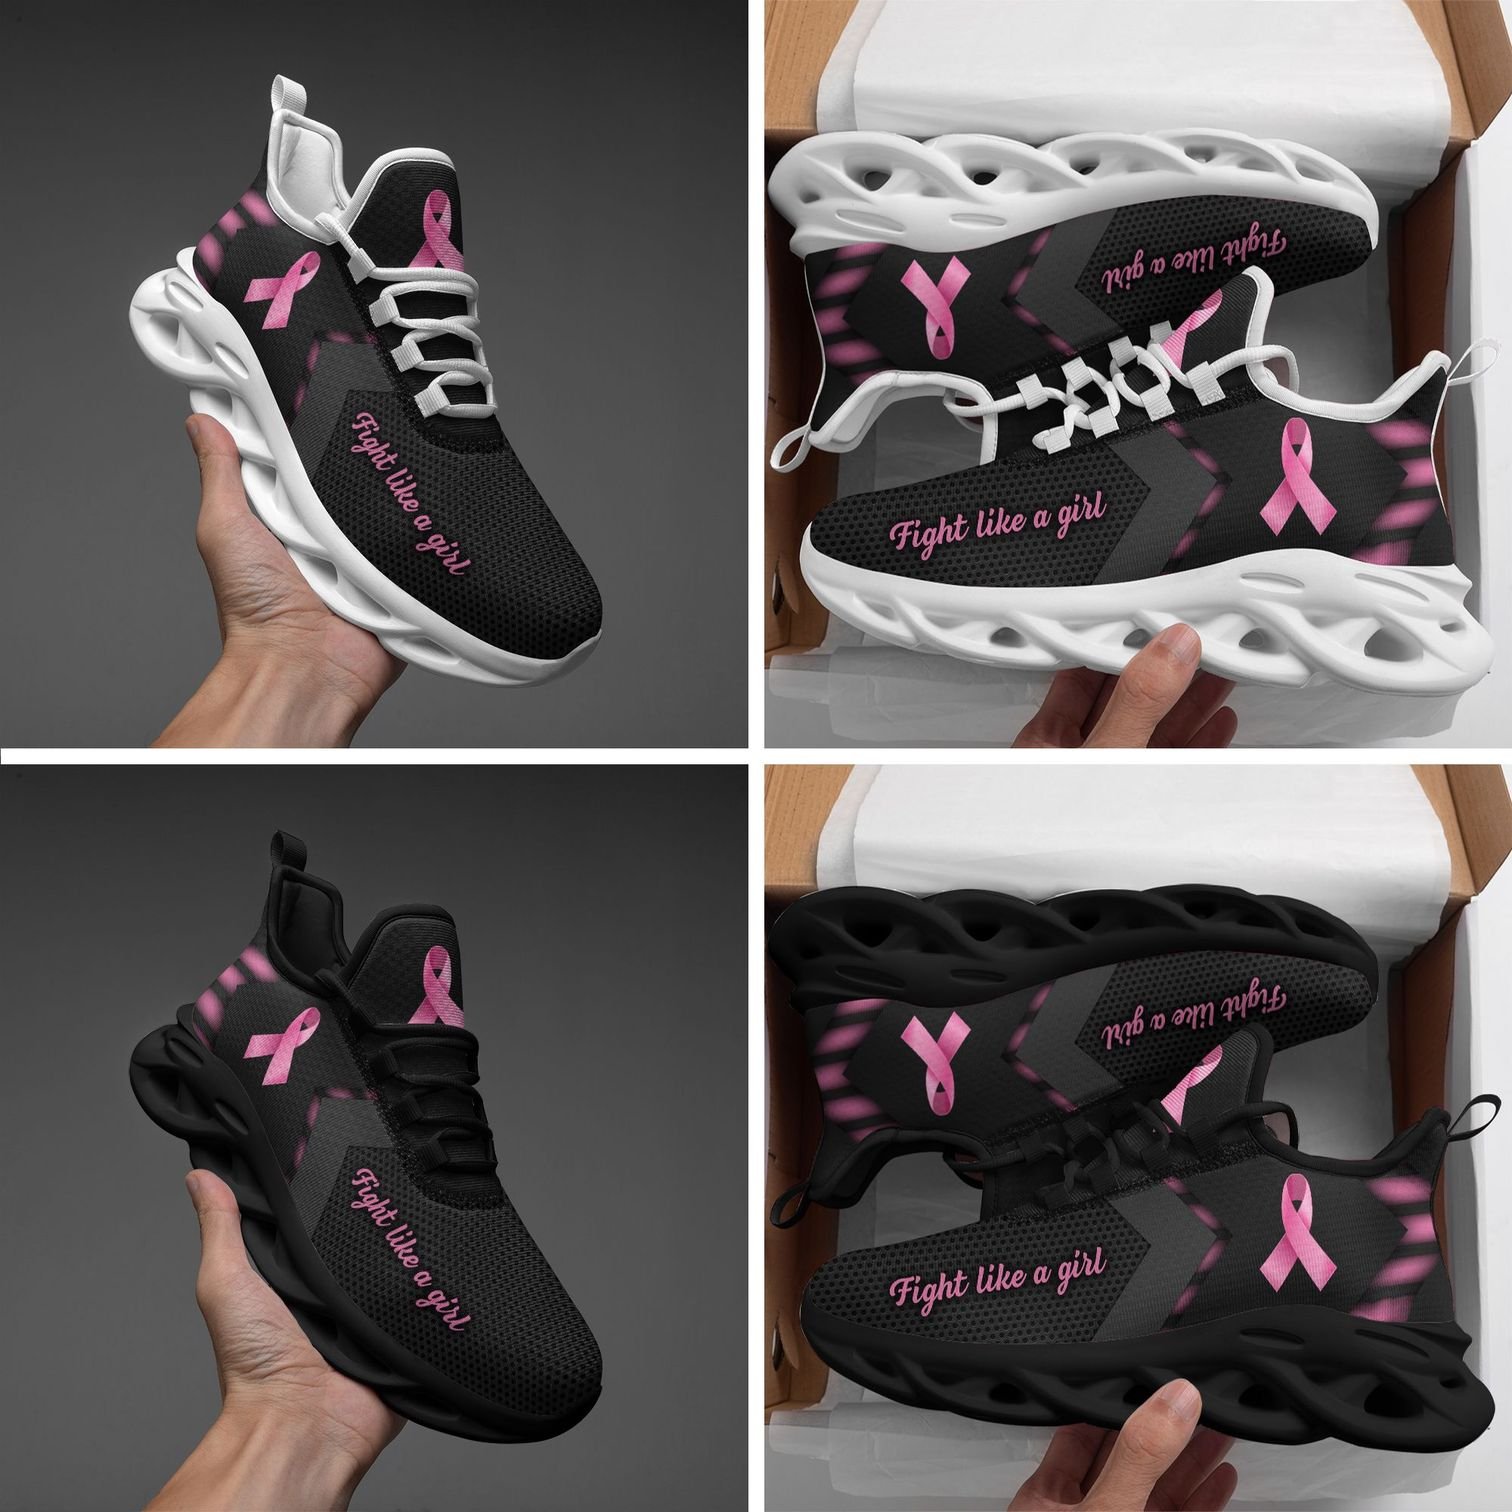 Breast cancer fight like a girl clunky max soul shoes – LIMITED EDITION